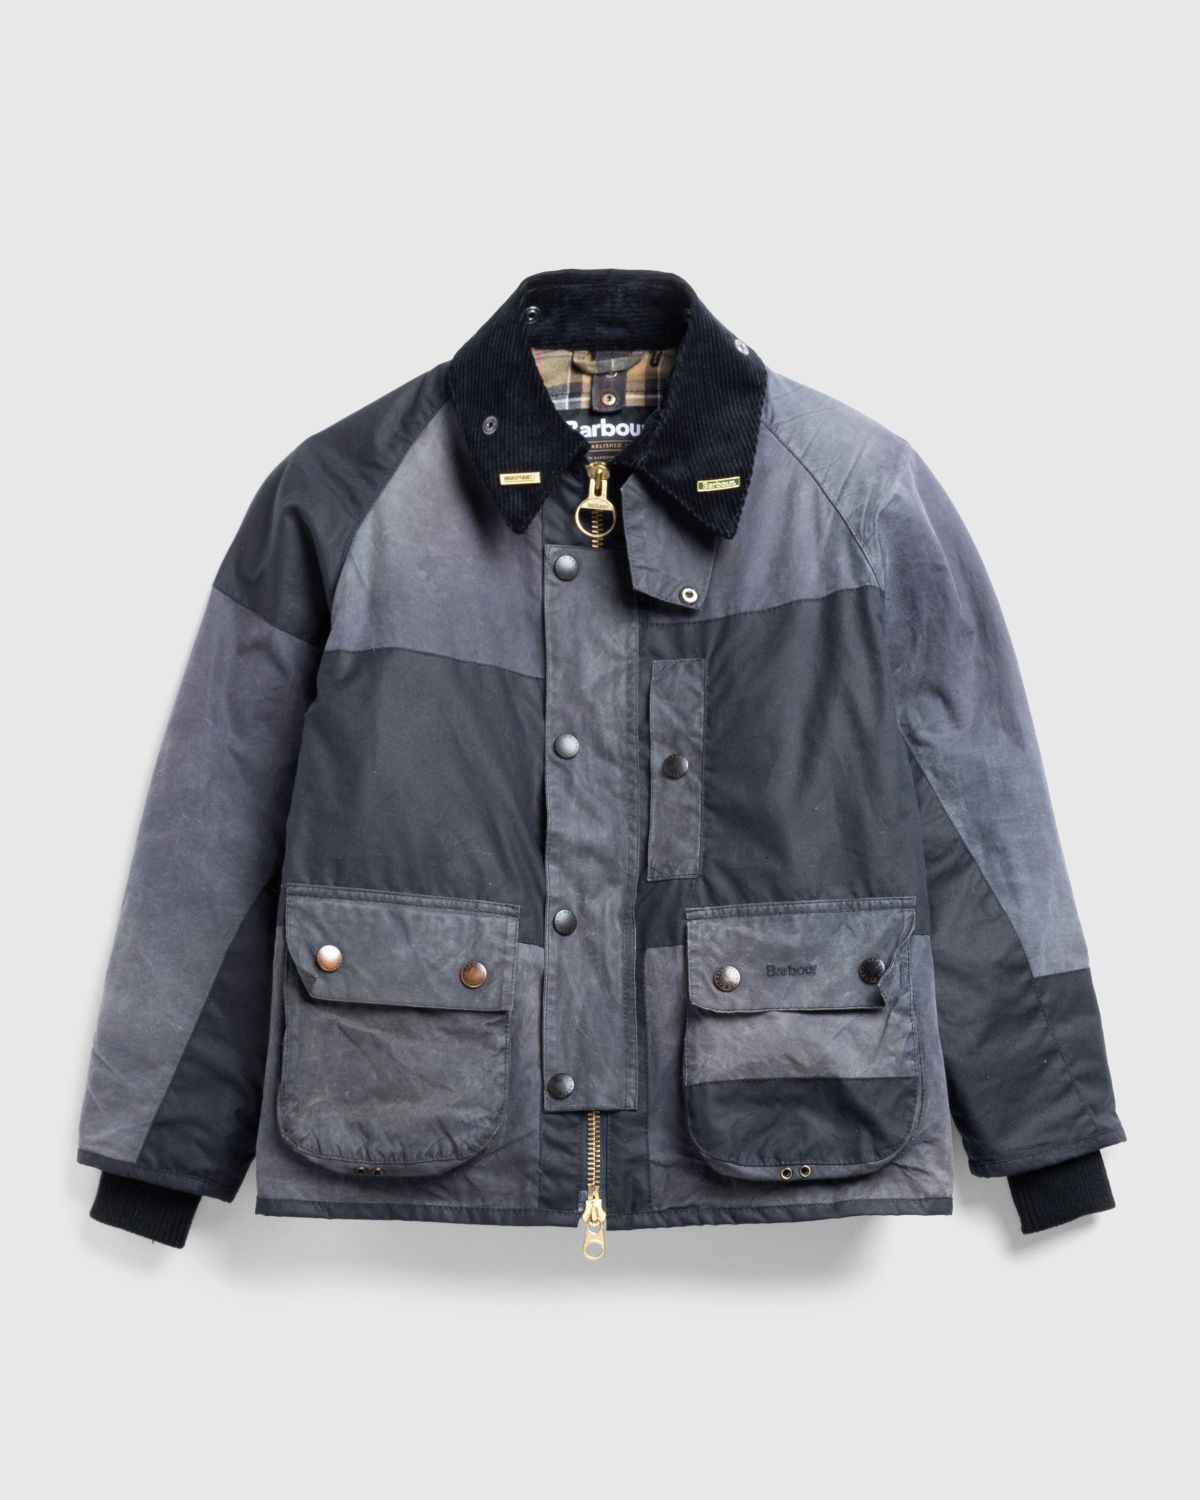 Barbour x Highsnobiety – Re-Loved Bedale Jacket Size 36 (S) Gray 